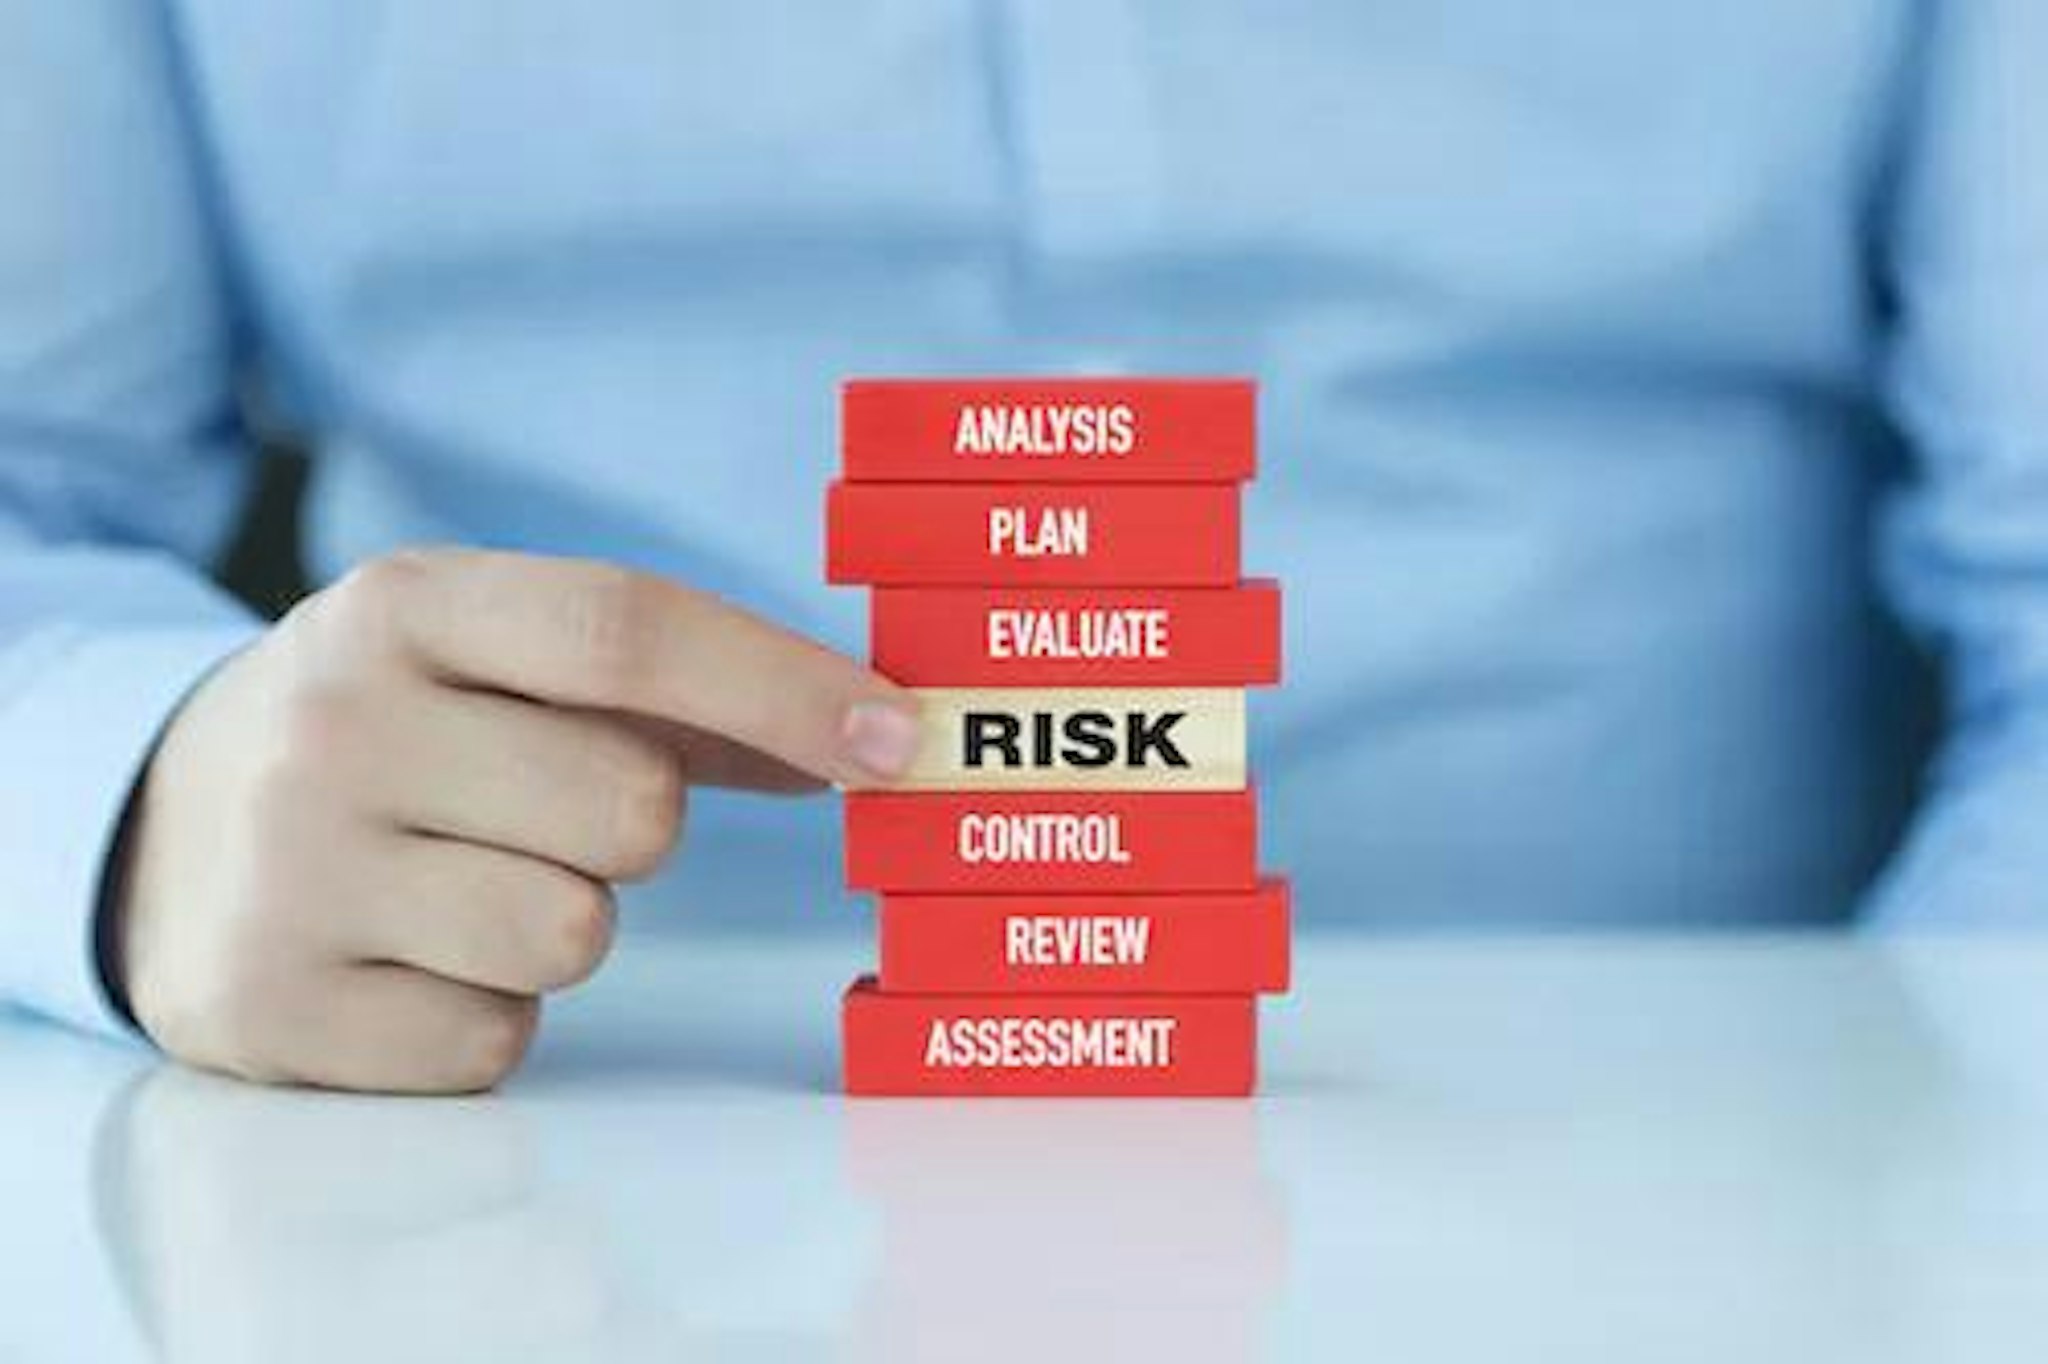 red jenga blocks with white text reading: Analysis, plan, control, renew, refreshment. In the middle of these bricks is a beige block with bold black writing reading "risk" and someone reaching to select this risk block. This image represents the need for risk management best practices for entity management.